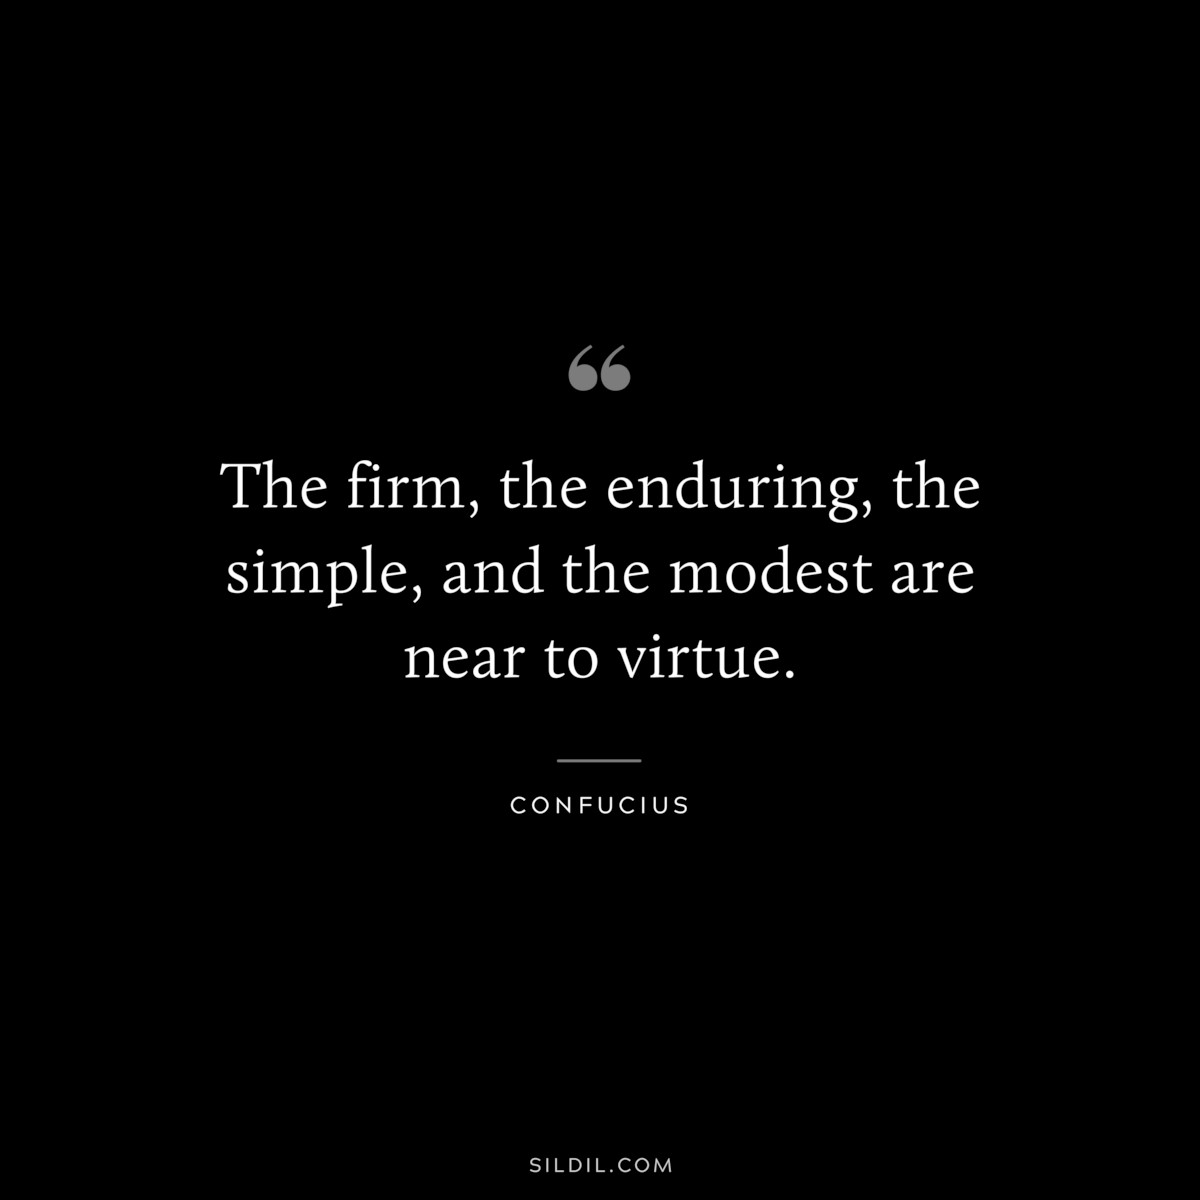 The firm, the enduring, the simple, and the modest are near to virtue. ― Confucius